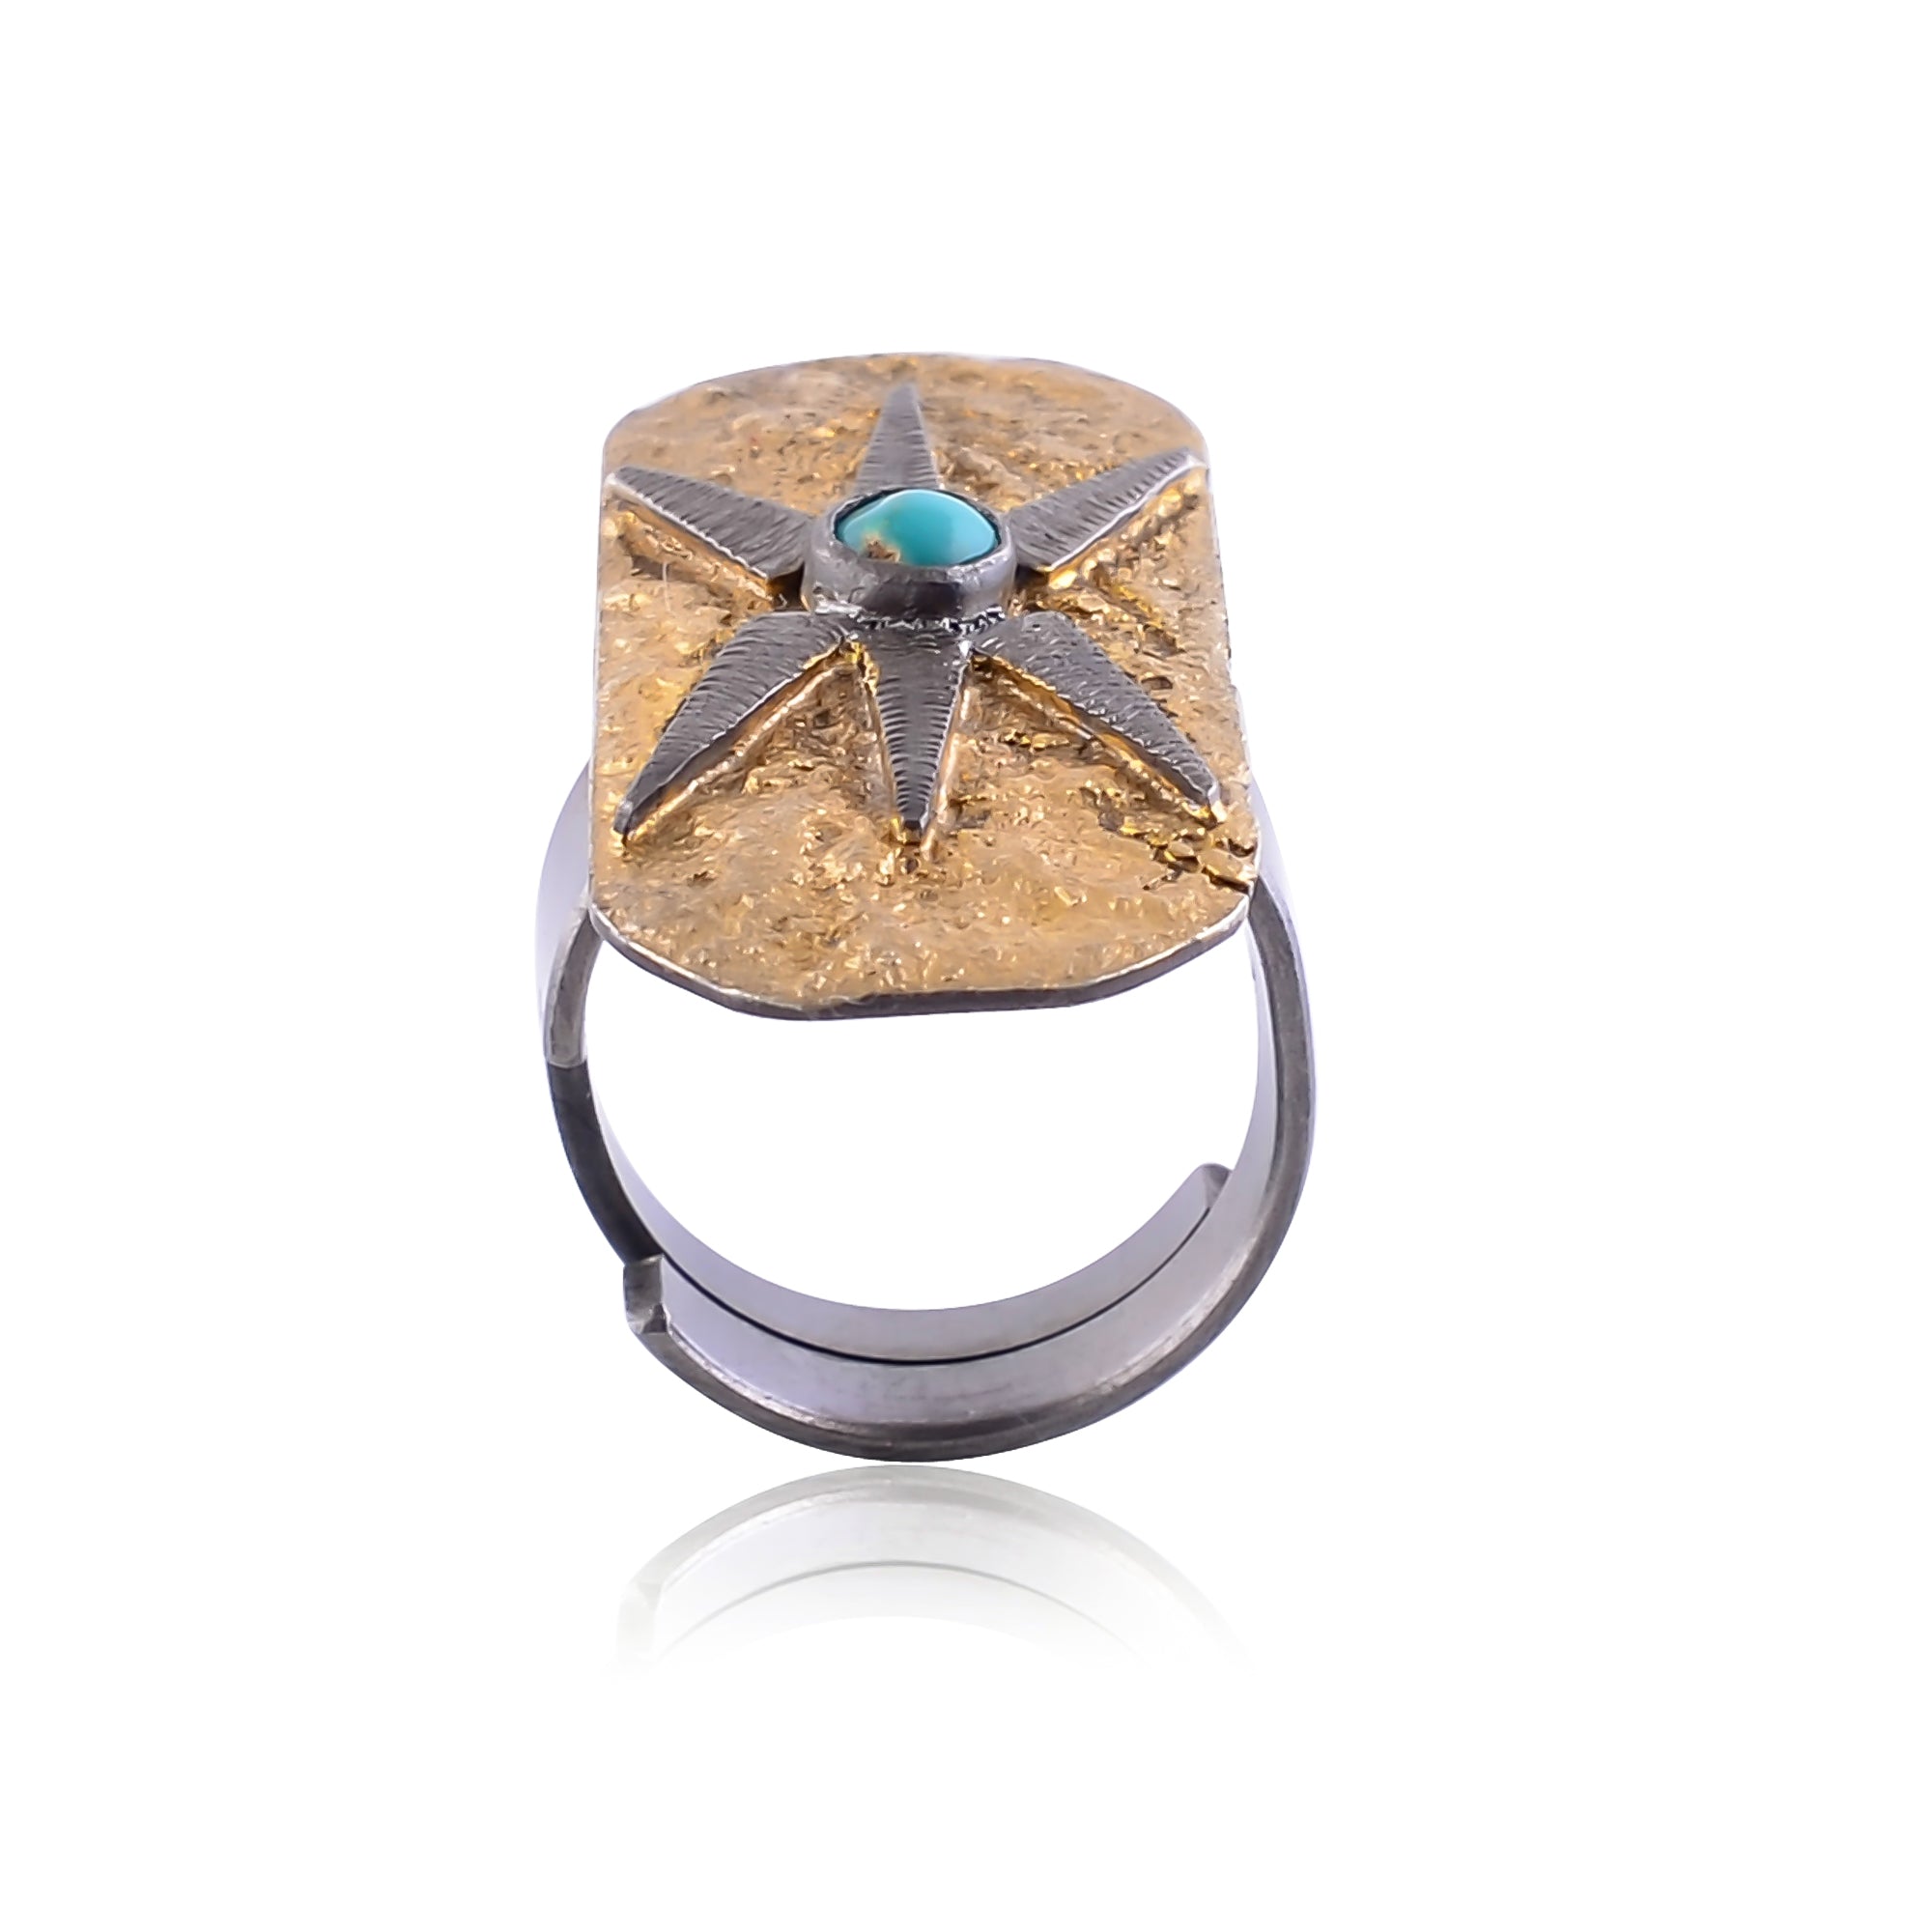 Buy Handmade Silver Gold Black Plated Turquoise Ring